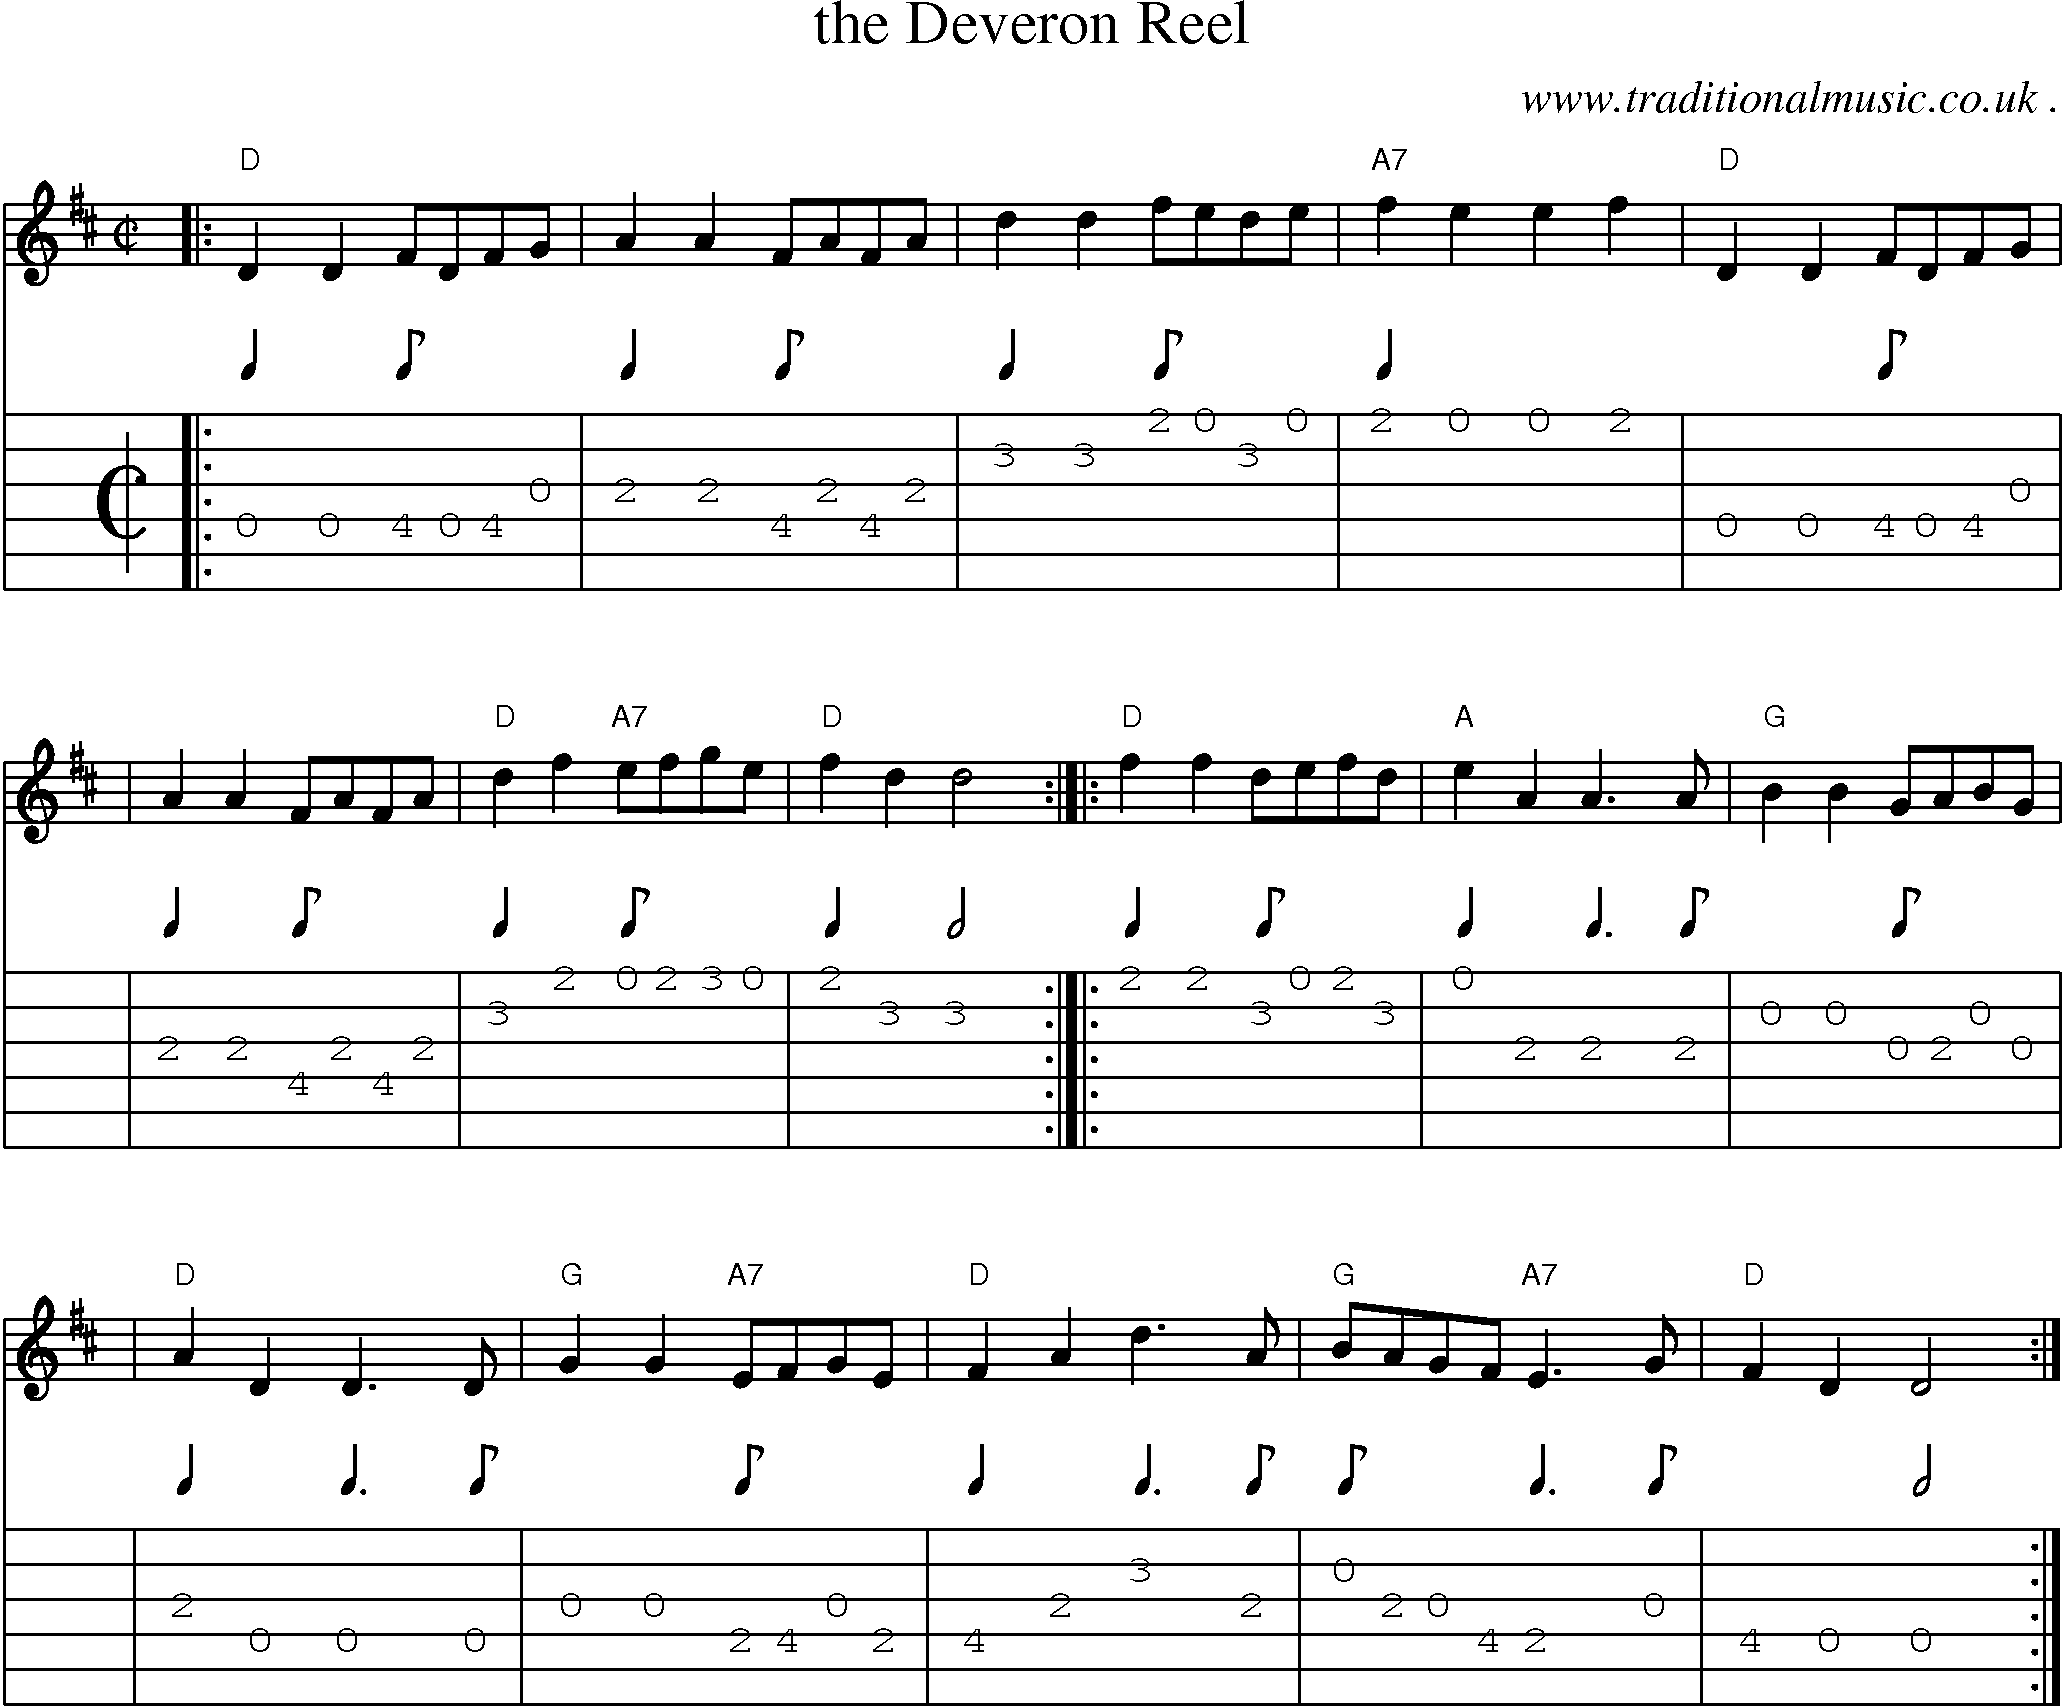 Sheet-music  score, Chords and Guitar Tabs for The Deveron Reel